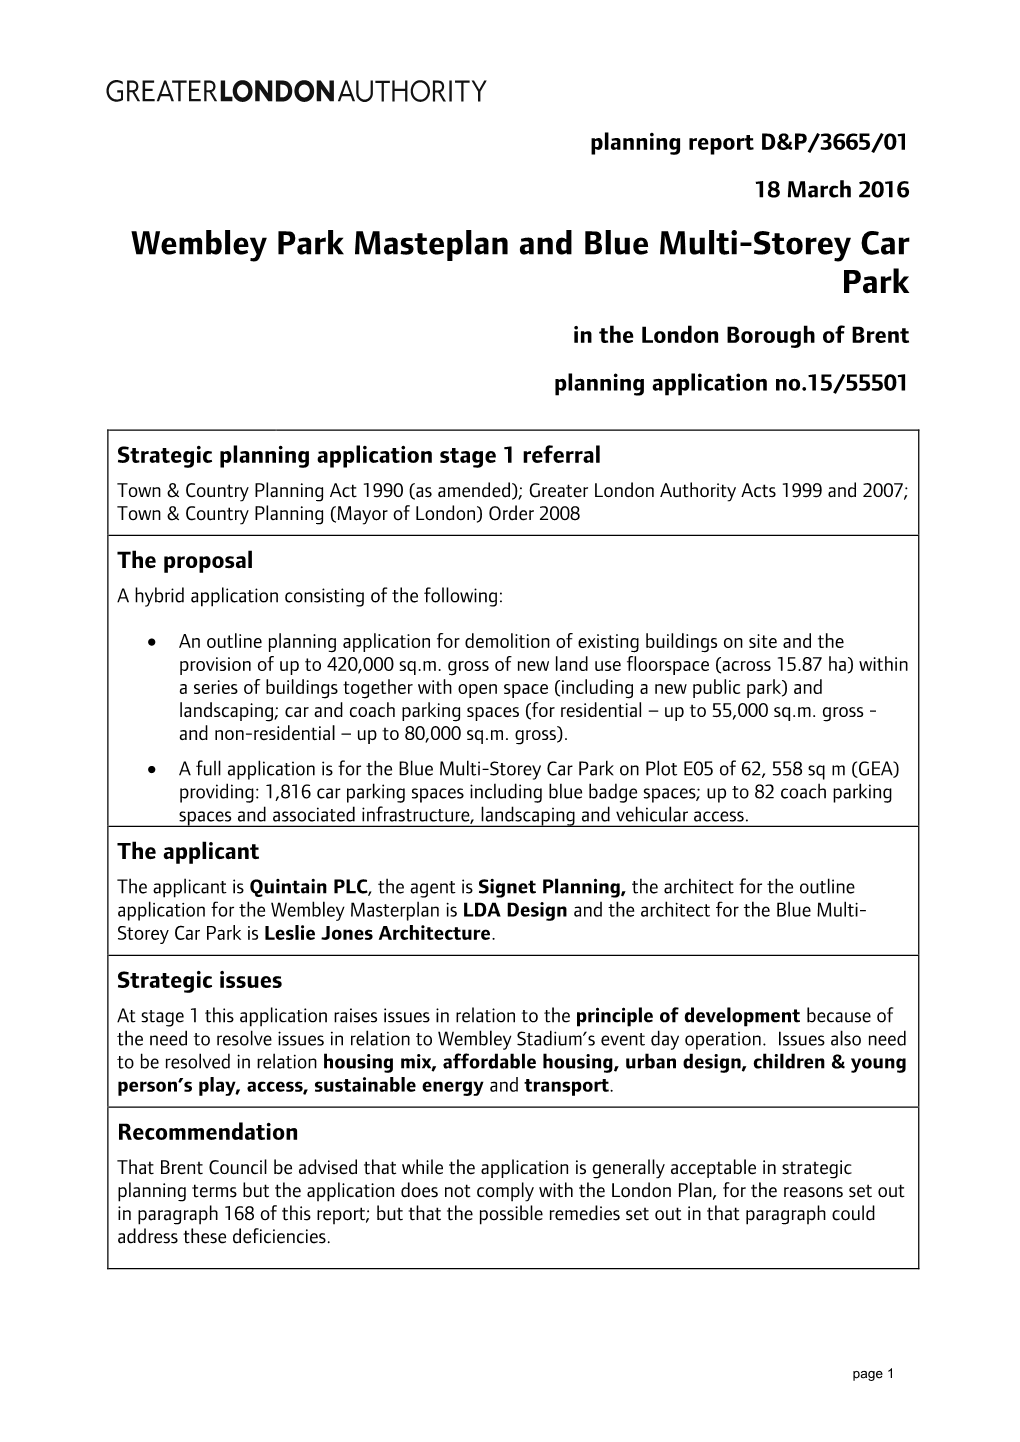 Wembley Park Masteplan and Blue Multi-Storey Car Park in the London Borough of Brent Planning Application No.15/55501